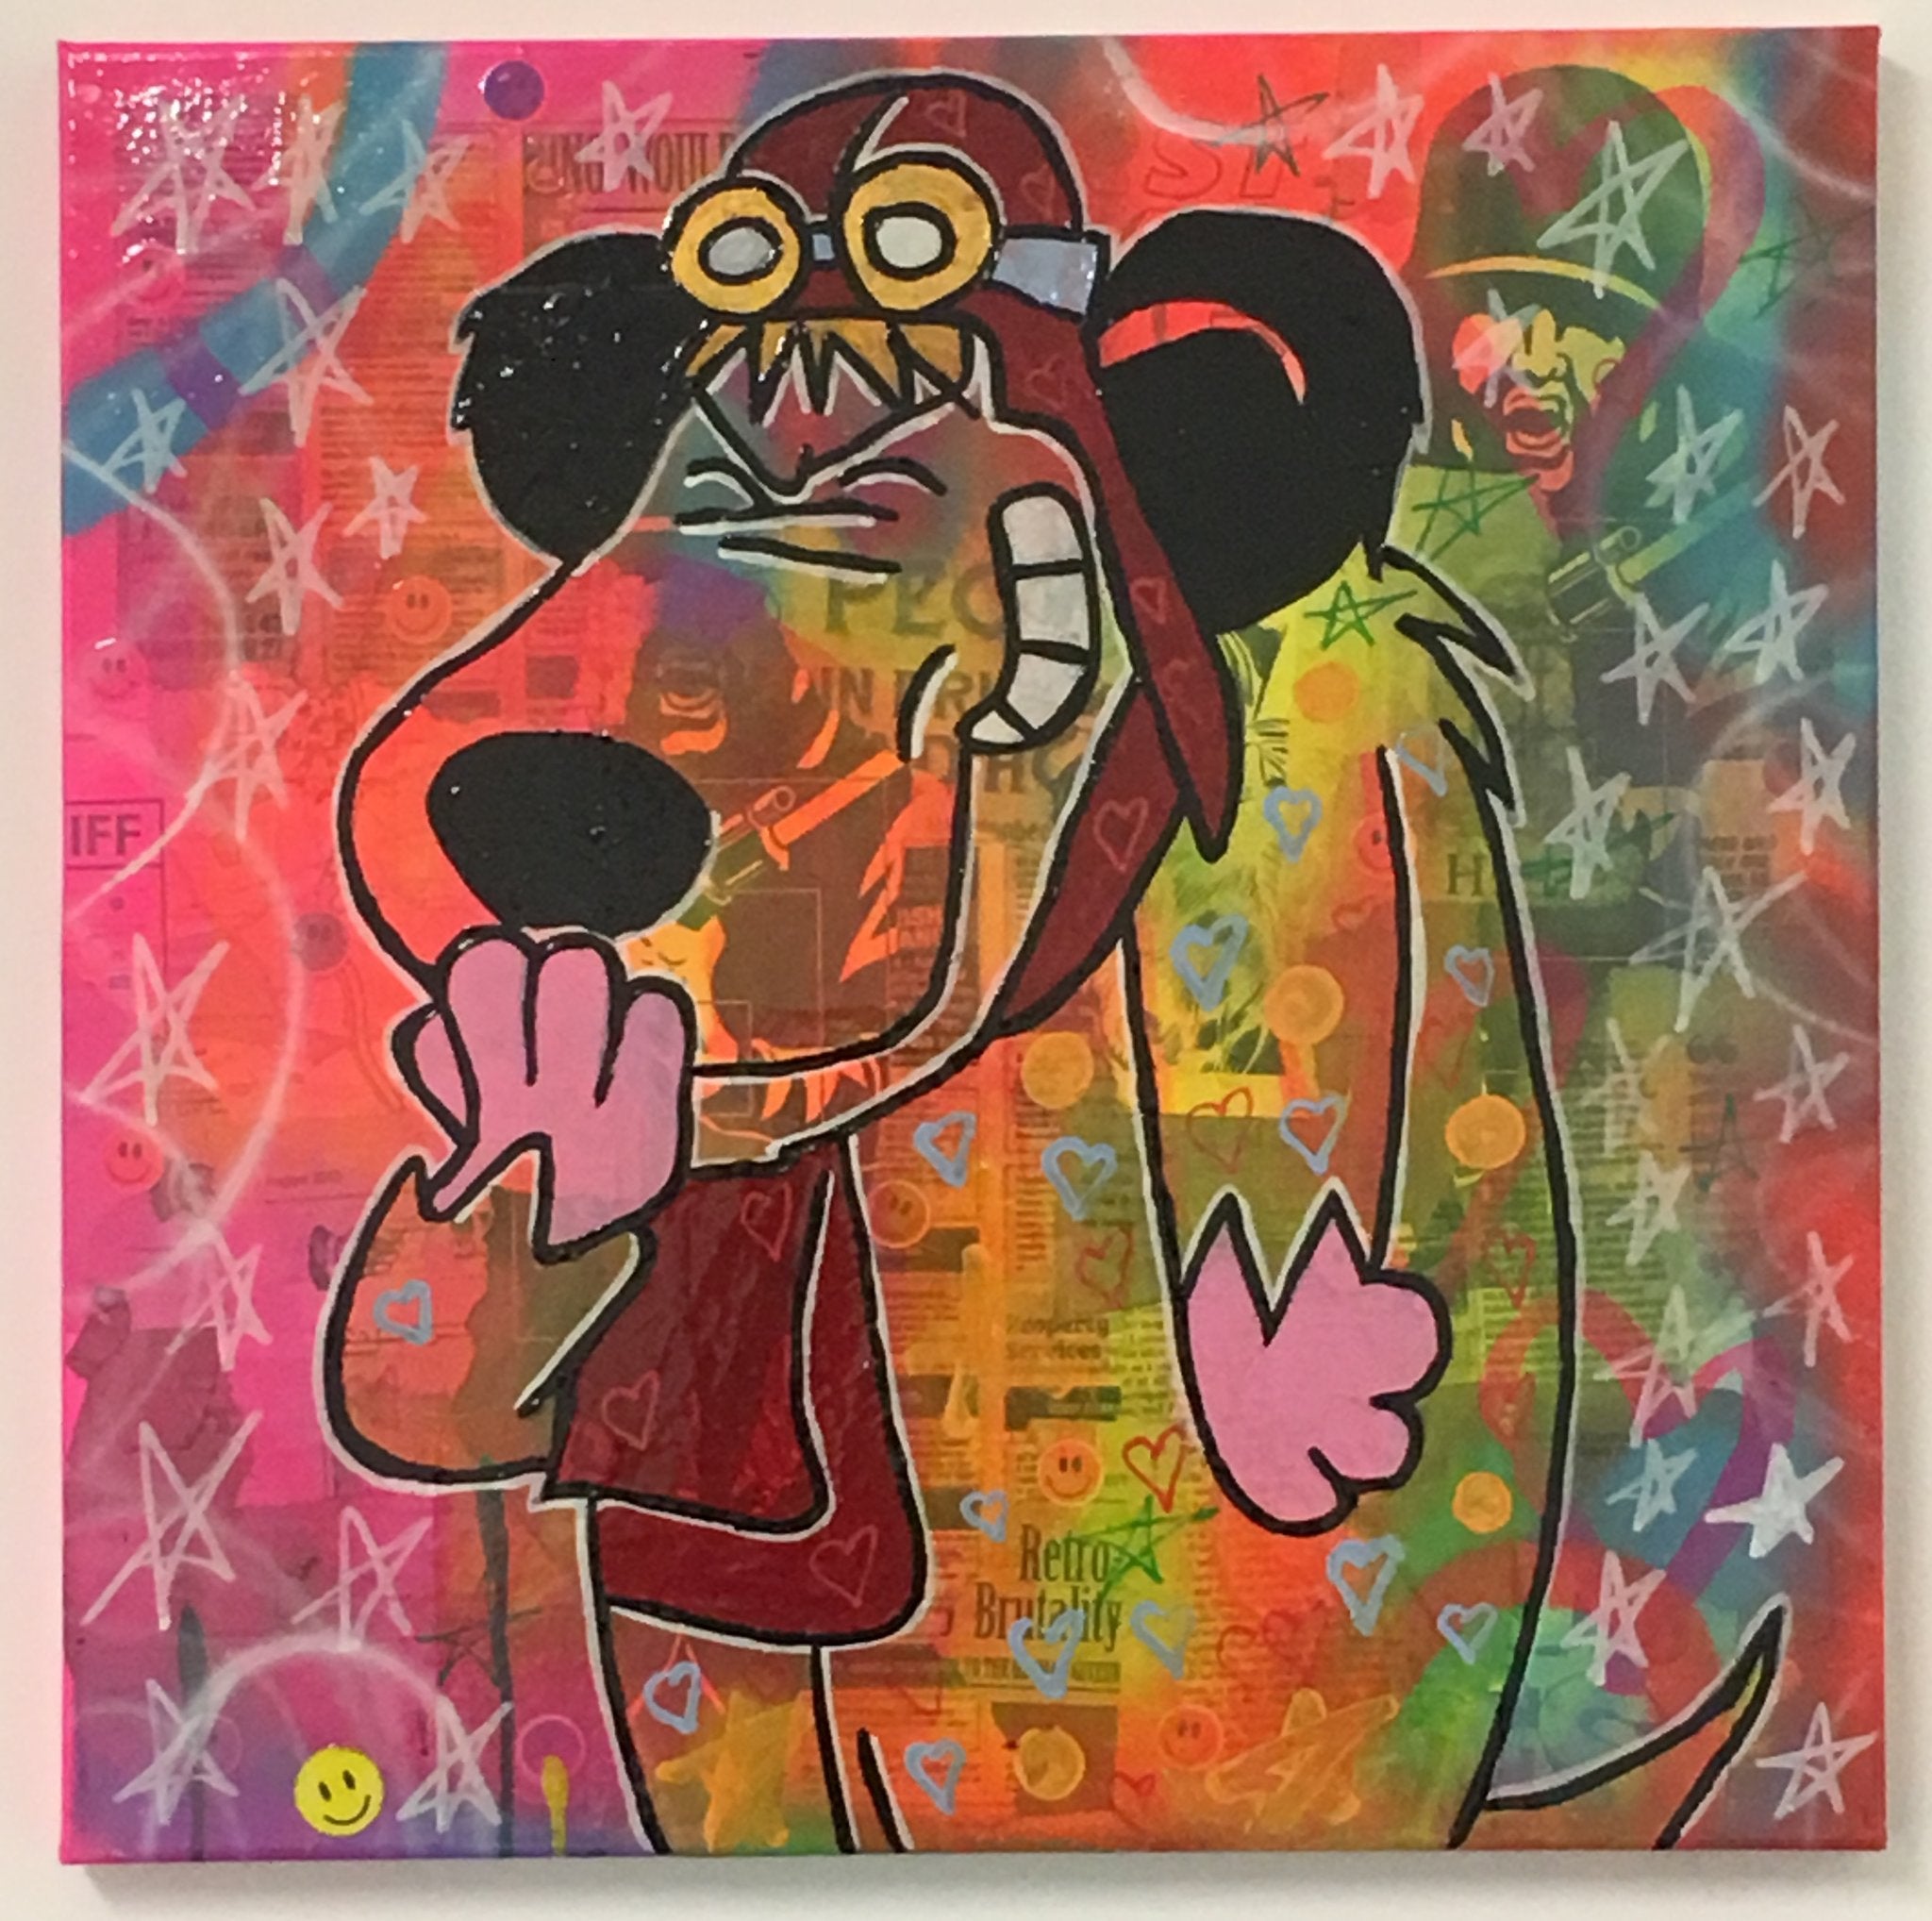 I Wanna be your dog by Barrie J Davies 2018, Mixed media on Canvas, 50cm x 50cm, Unframed. Pop Art and Street art inspired Artist based in Brighton England UK - Pop Art Paintings, Street Art Prints & Editions available. 